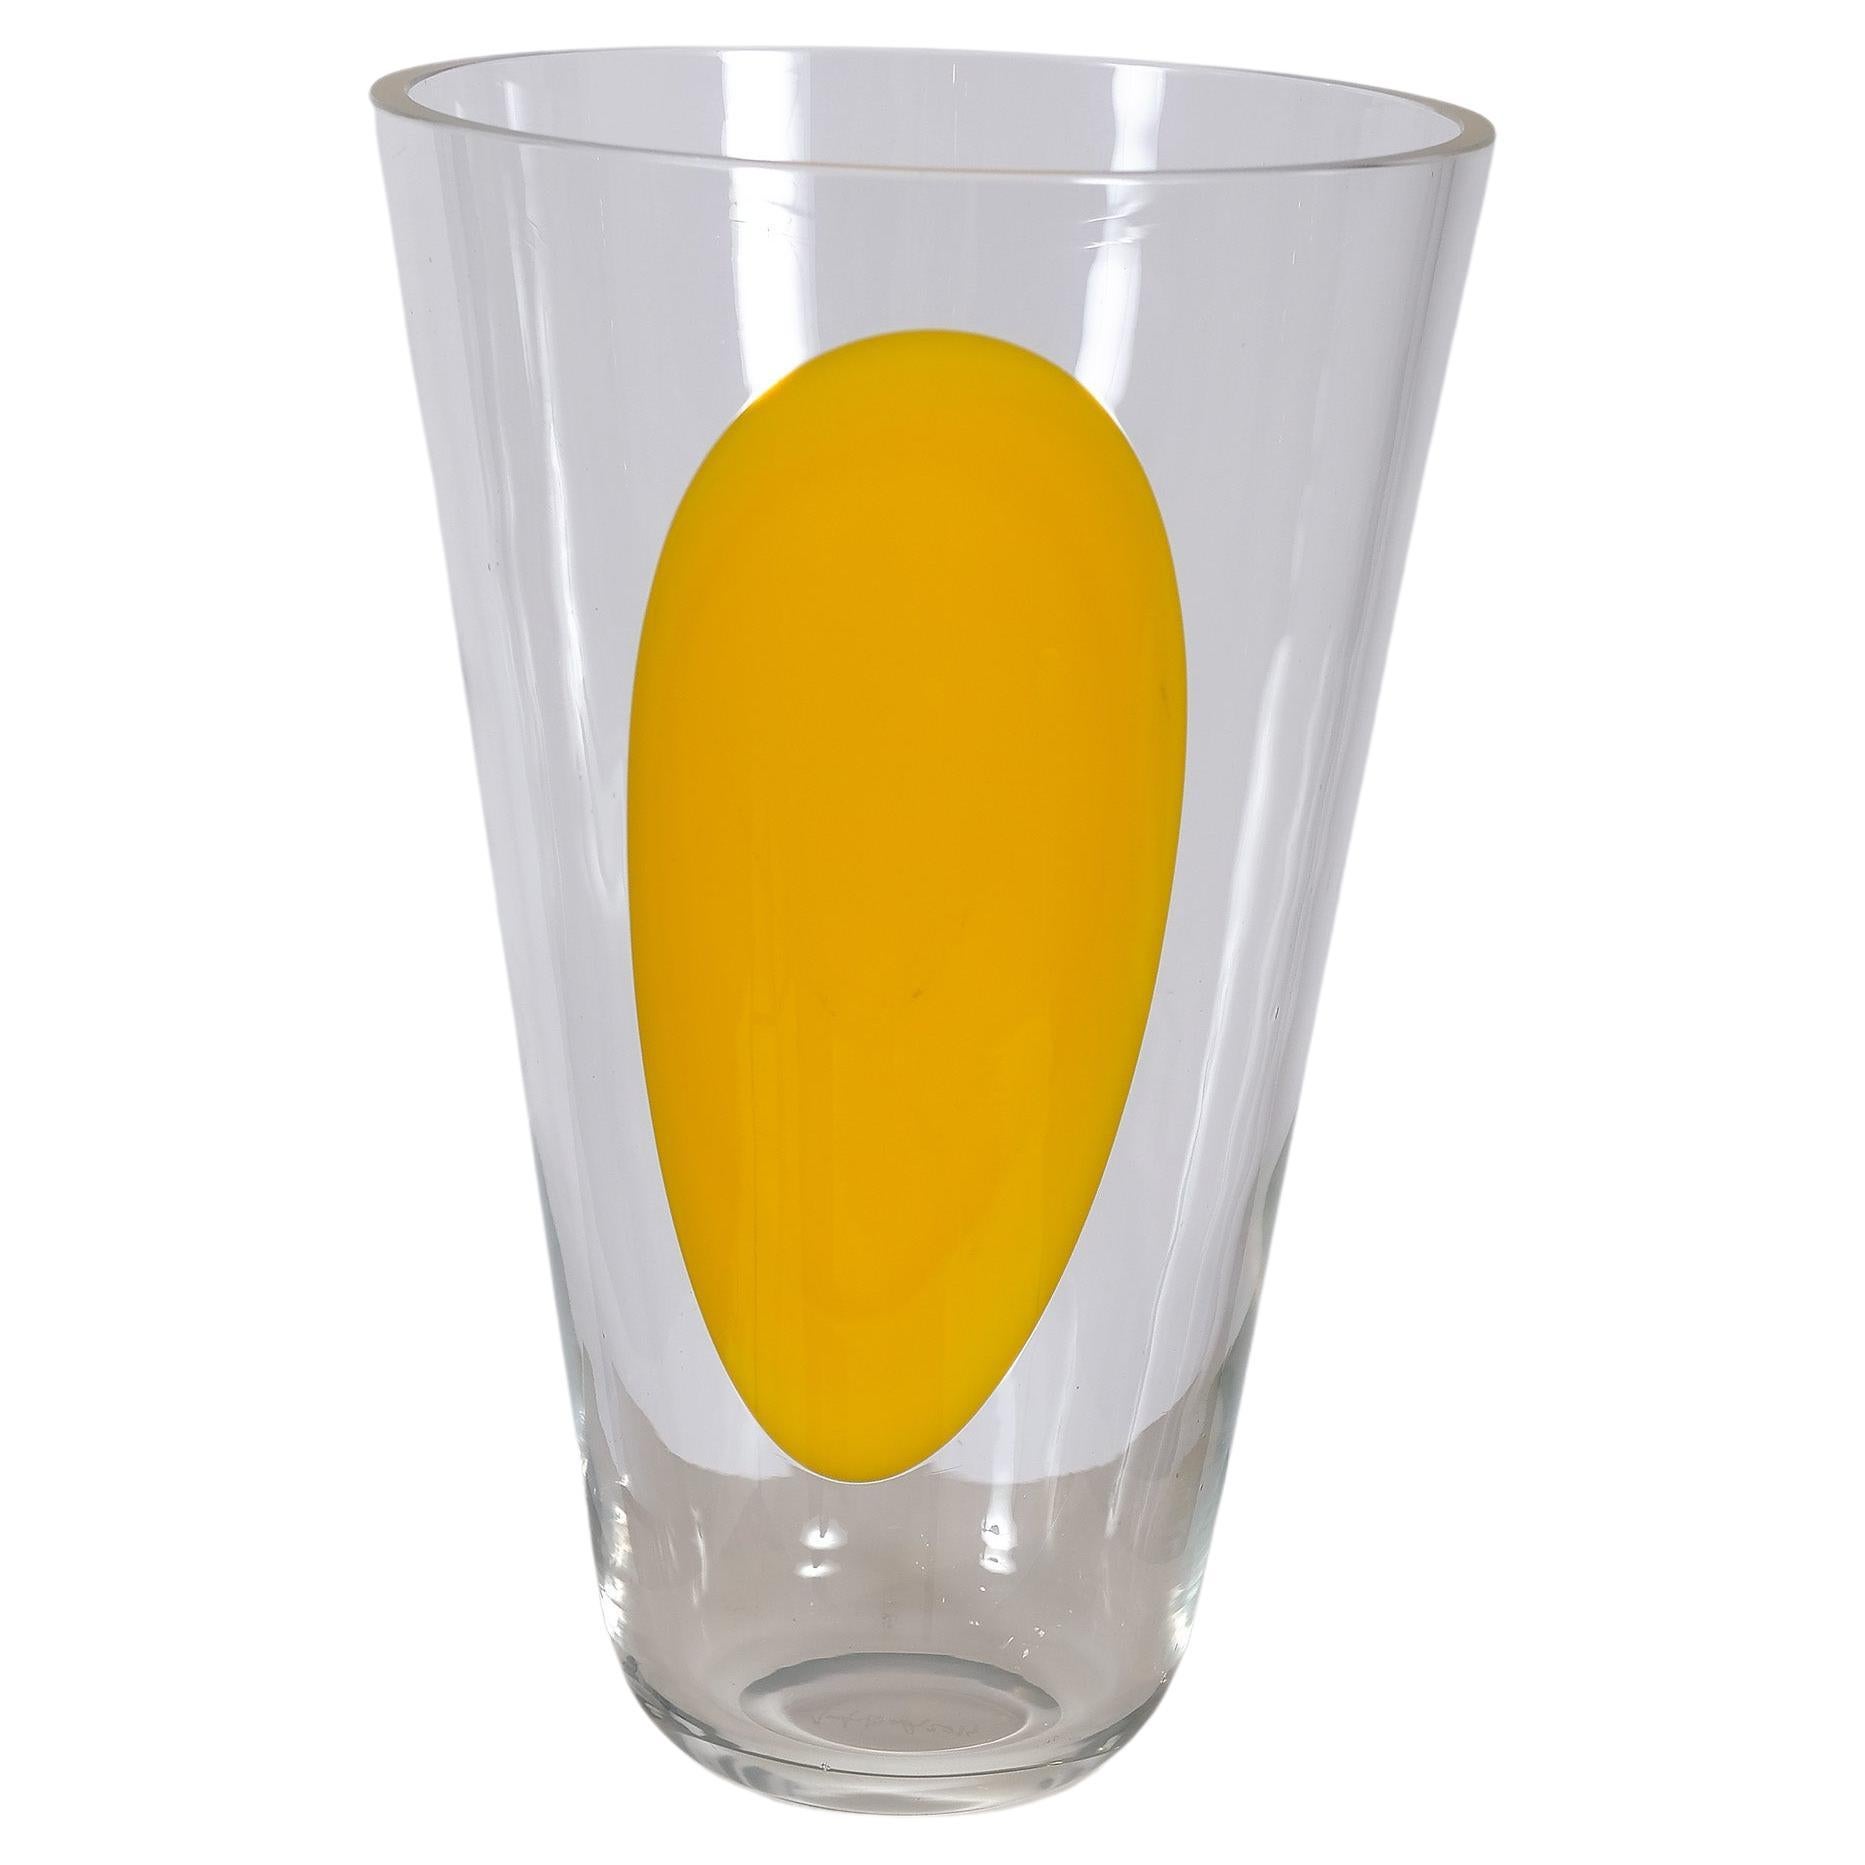 Crystal Vase with Yellow by Czech Artist Jakub Berdyeh for Kubus